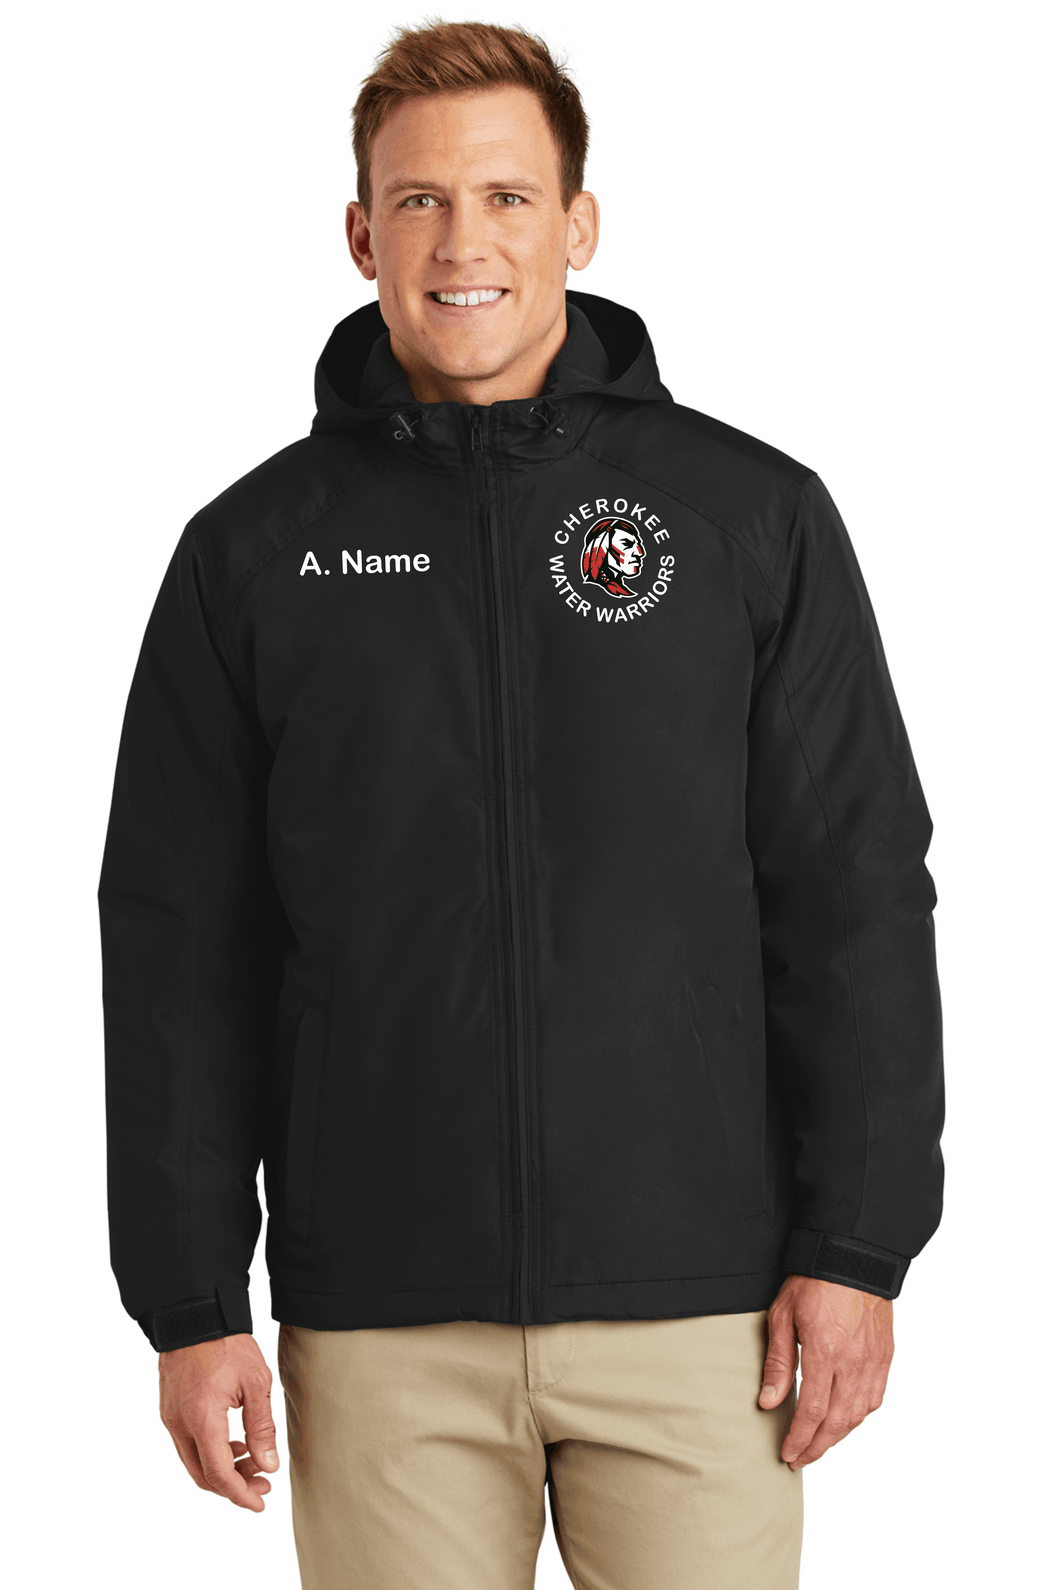 CHS-SD-371-5 - Port Authority Hooded Charger Jacket - Cheorkee Water Warriors Logo & Personalized Name